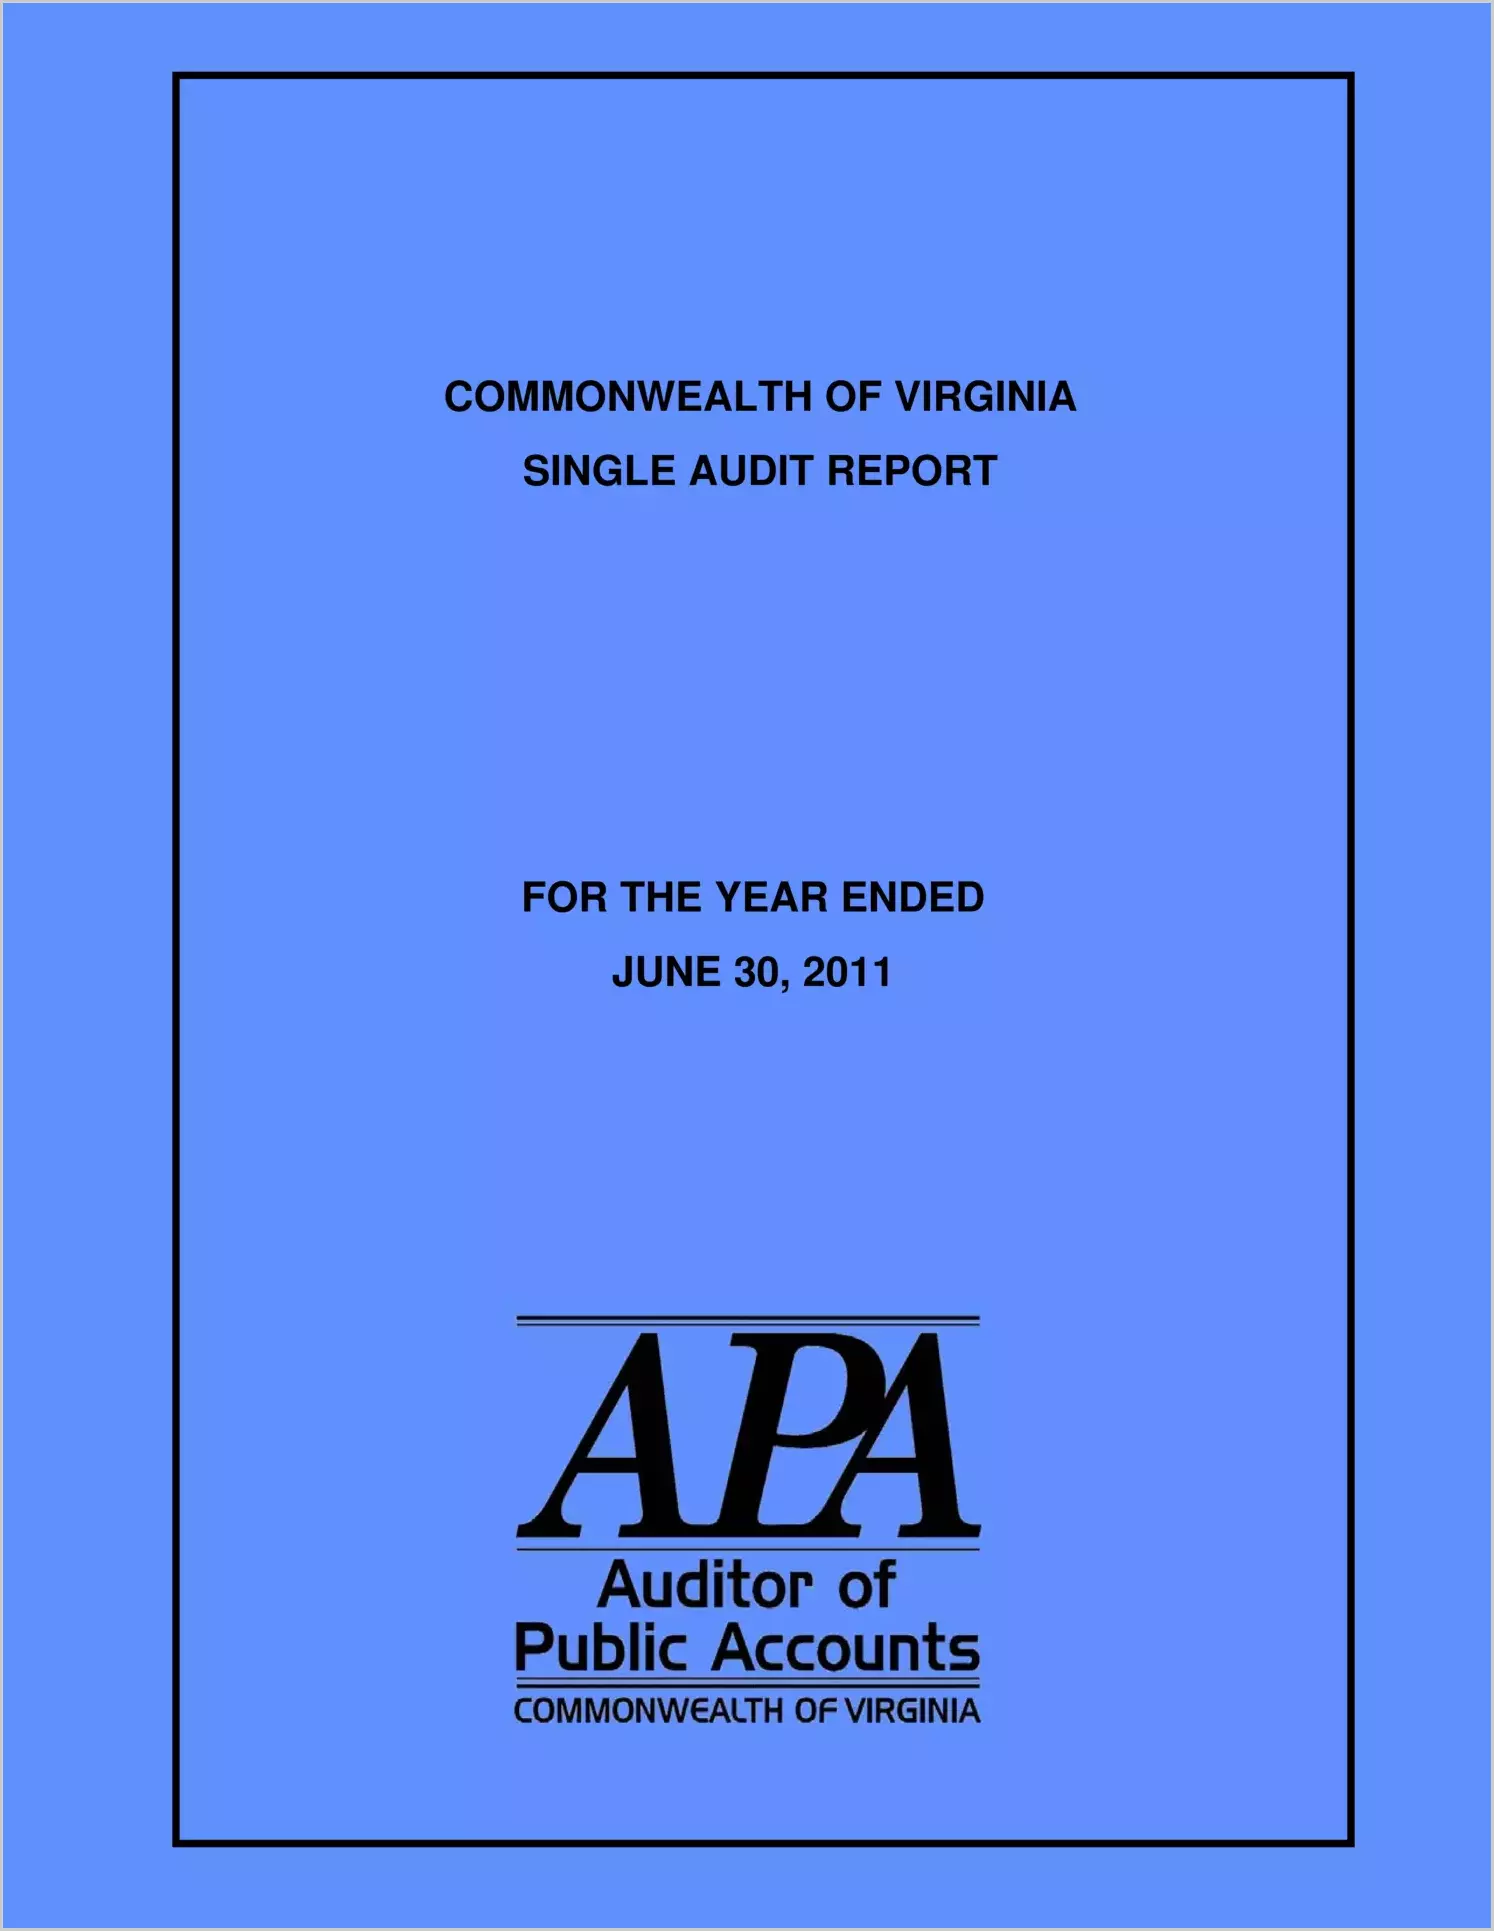 Commonwealth of Virginia Single Audit Report for the Year Ended June 30, 2011